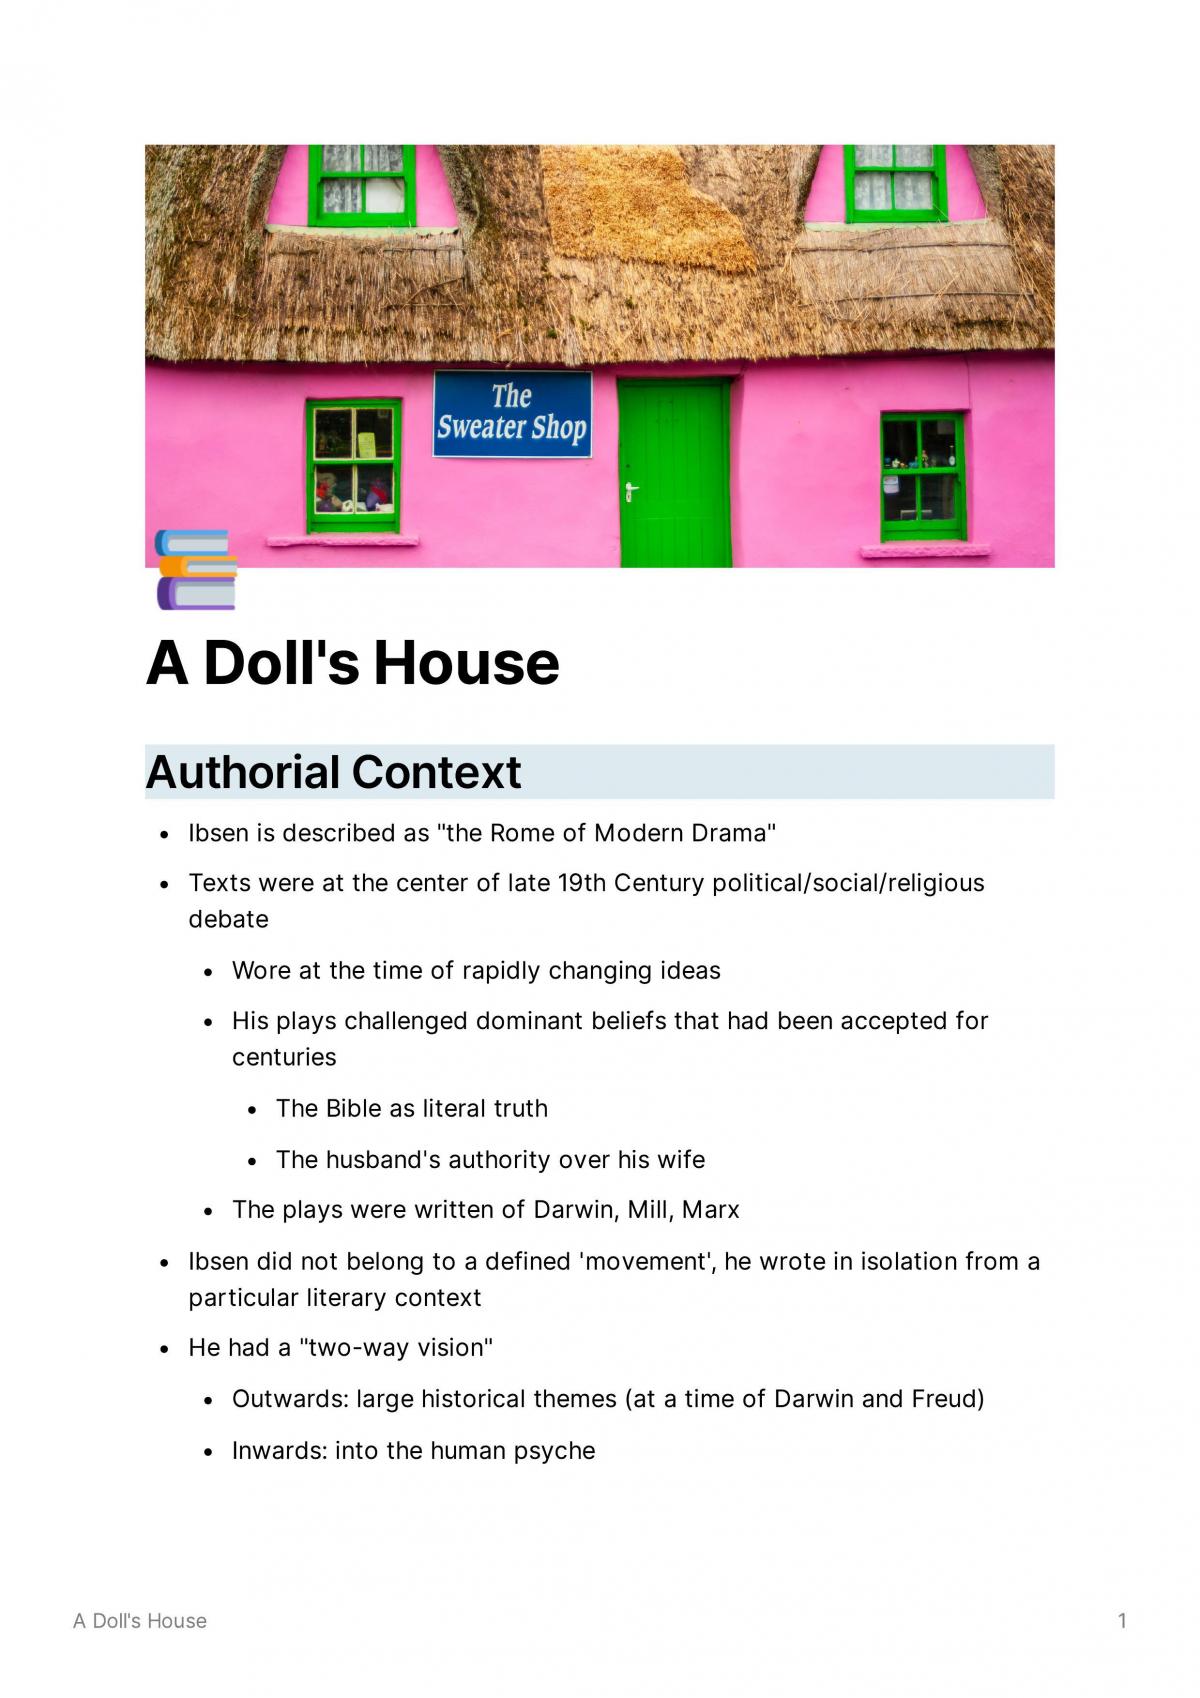 essay topics for a doll's house